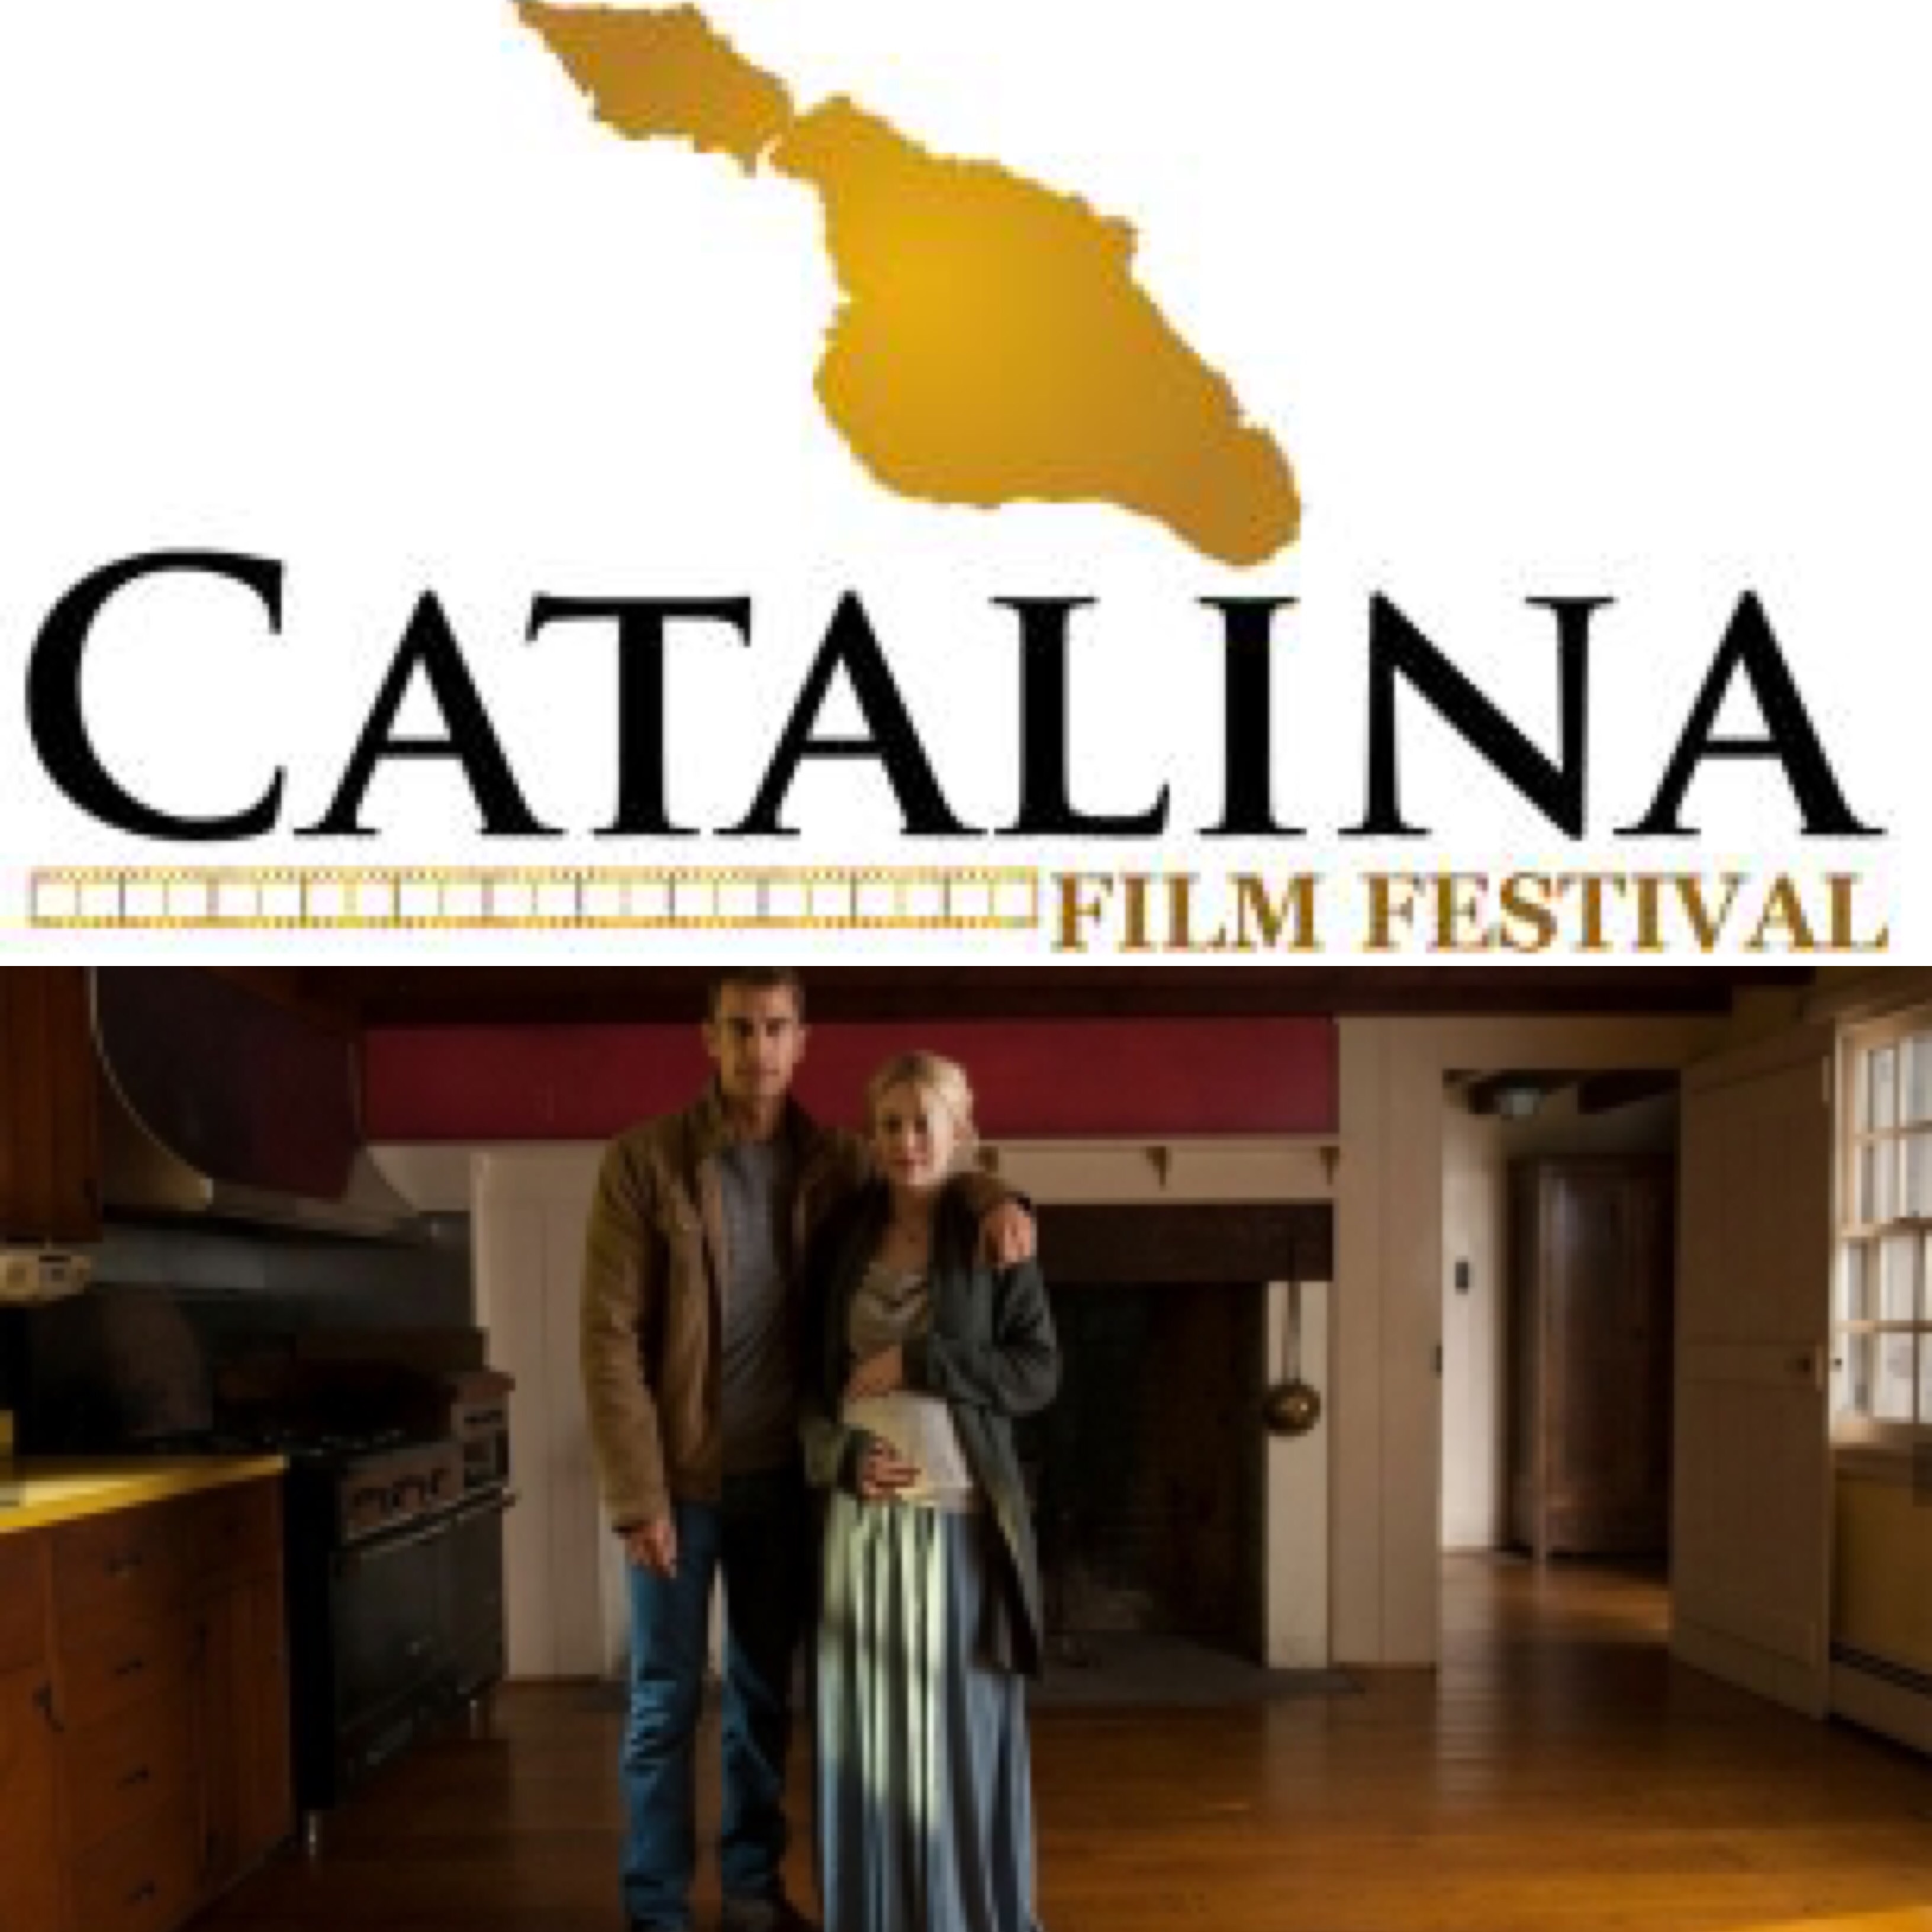 Theo James ‘The Benefactor’ (Franny) To Screen Saturday at the Catalina Film Festival